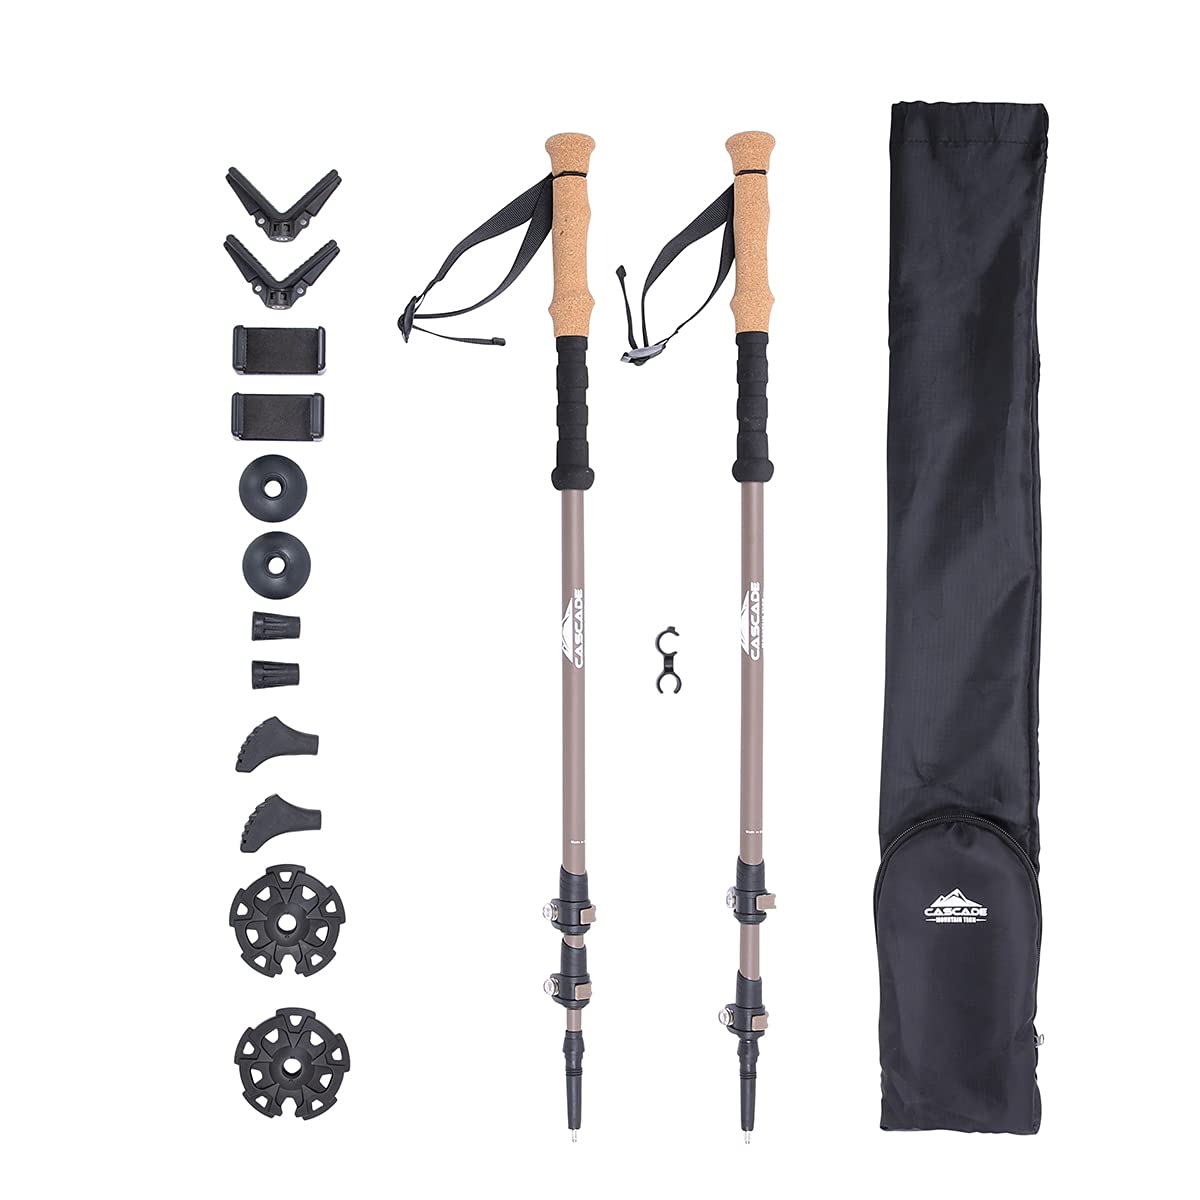 Cascade Mountain Tech Trekking Poles - 2 Piece Carbon Fiber Monopod Walking or Hiking Sticks with with Accessories Mount Ad